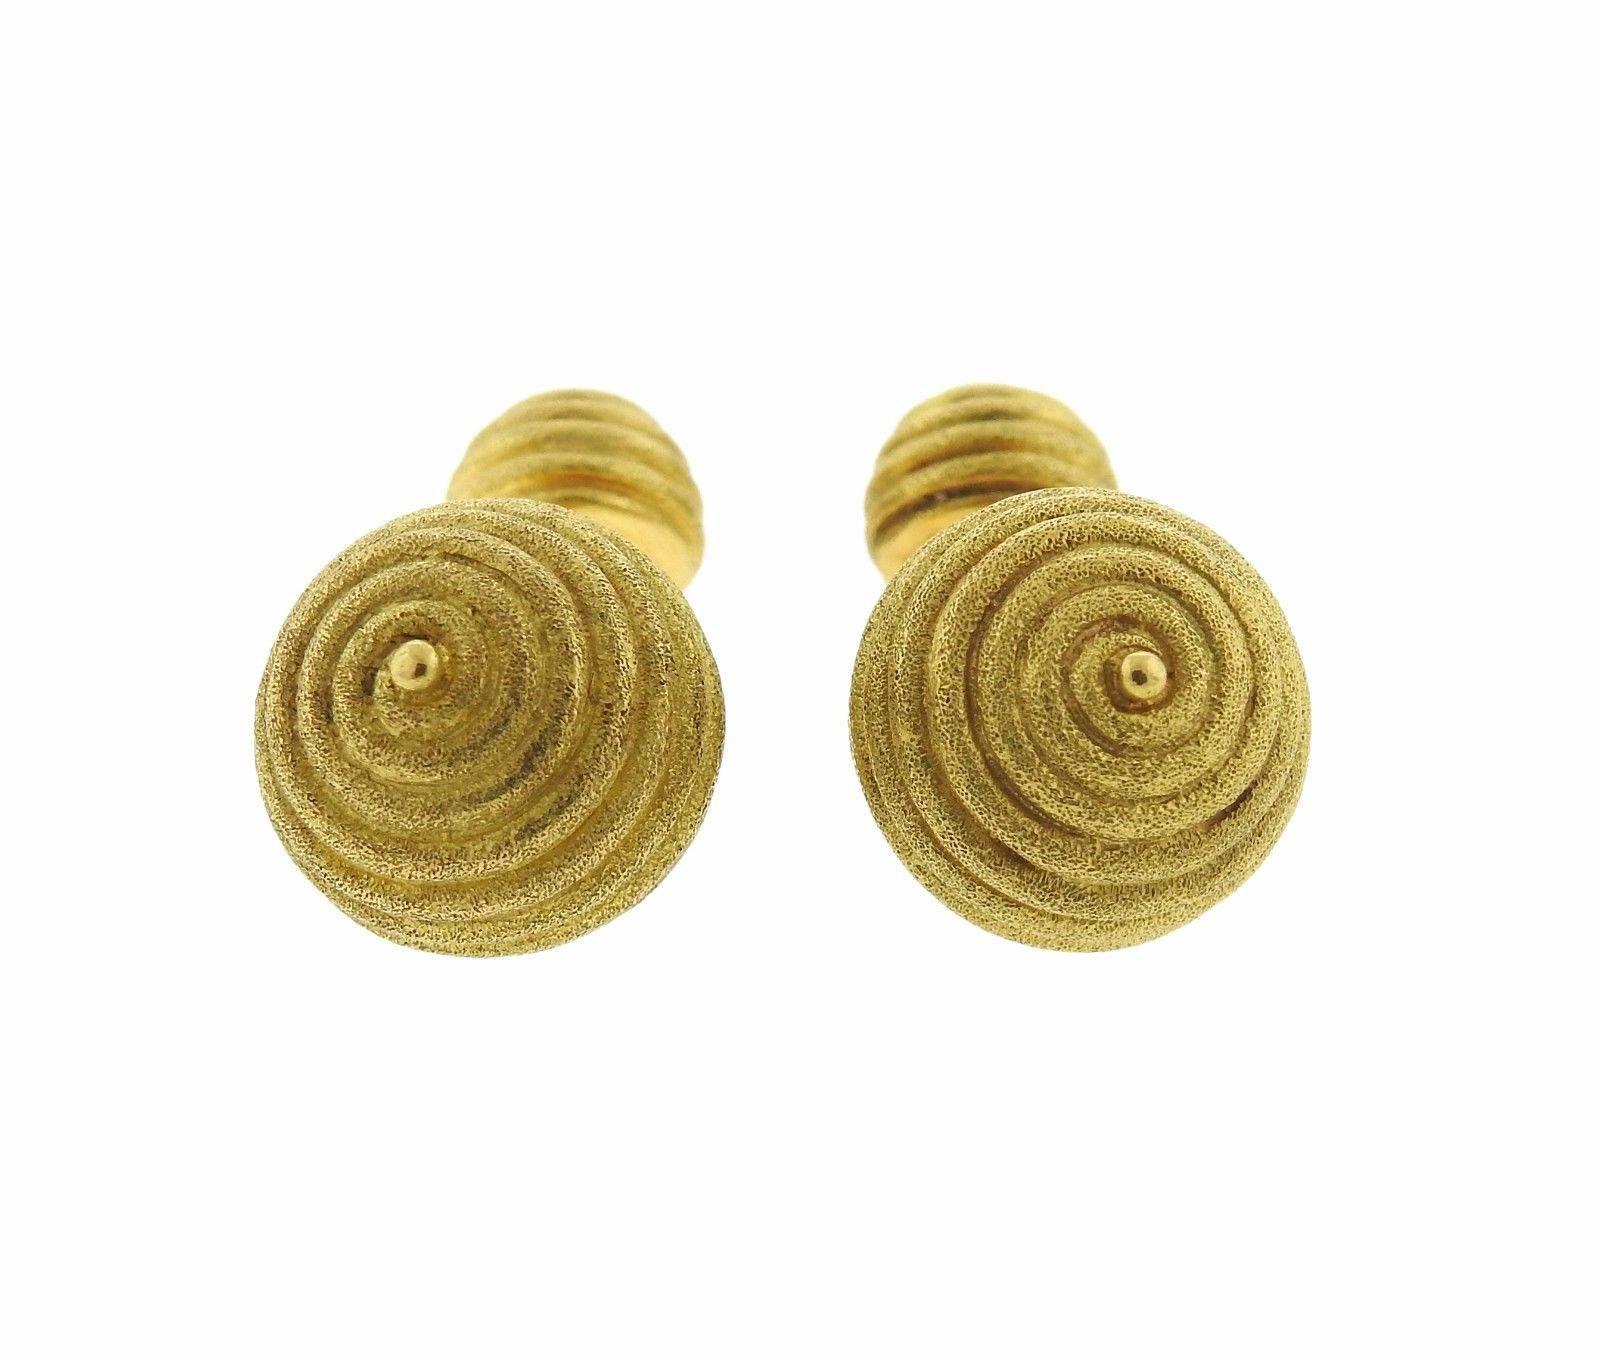 A pair of 18k gold cufflinks.  Cufflink tops measure 15.4mm in diameter.  The weight of the pair is 15.7 grams.